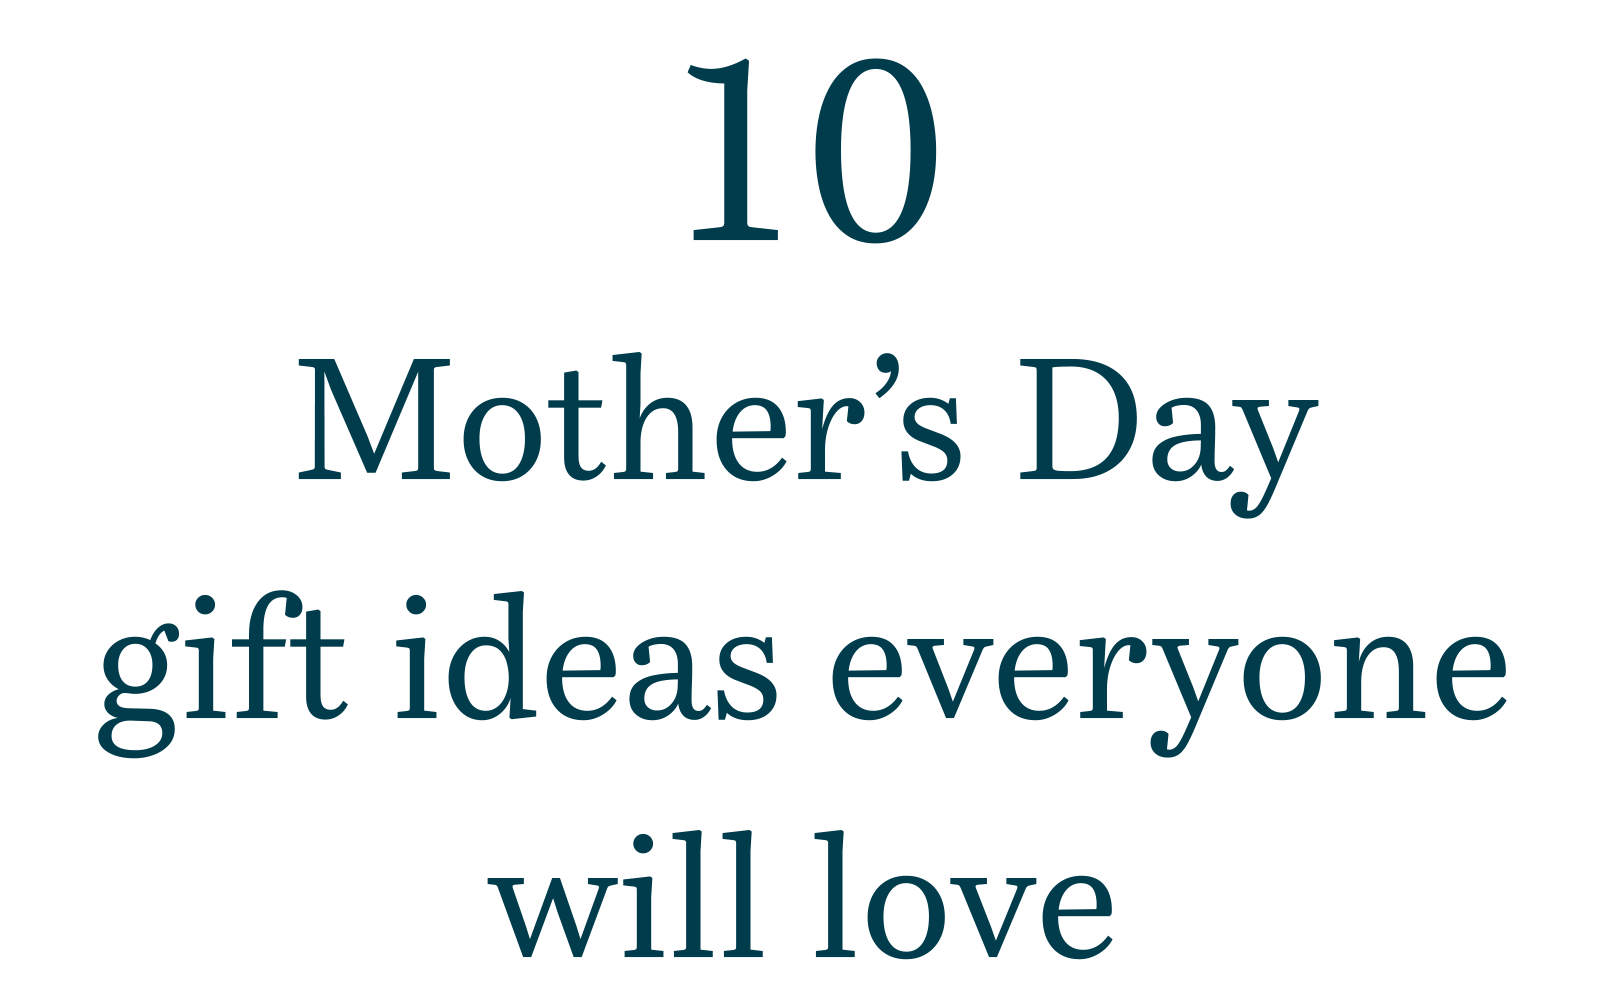 10 Mother’s Day gift ideas everyone will love